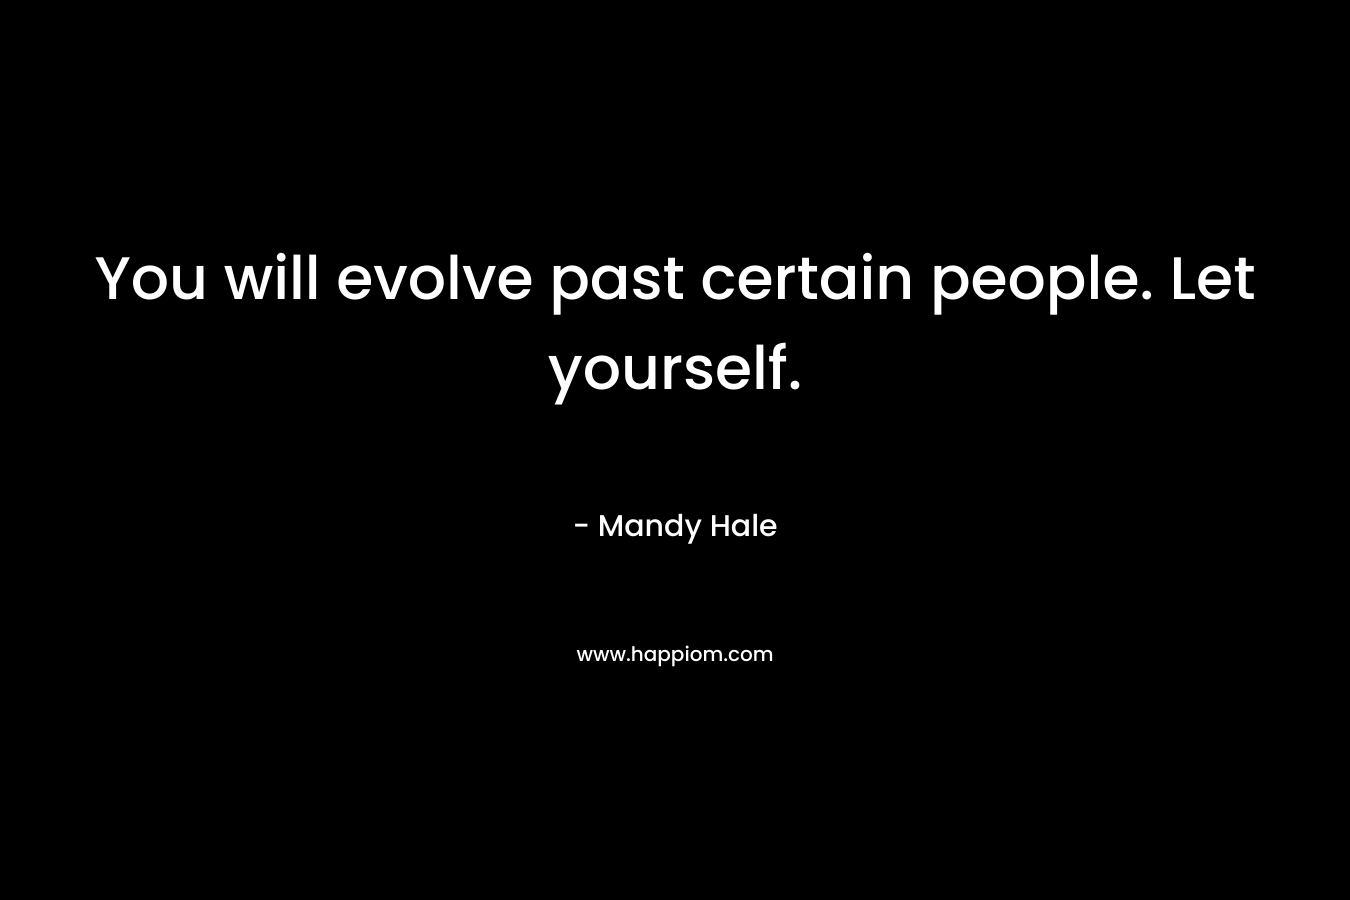 You will evolve past certain people. Let yourself. – Mandy Hale